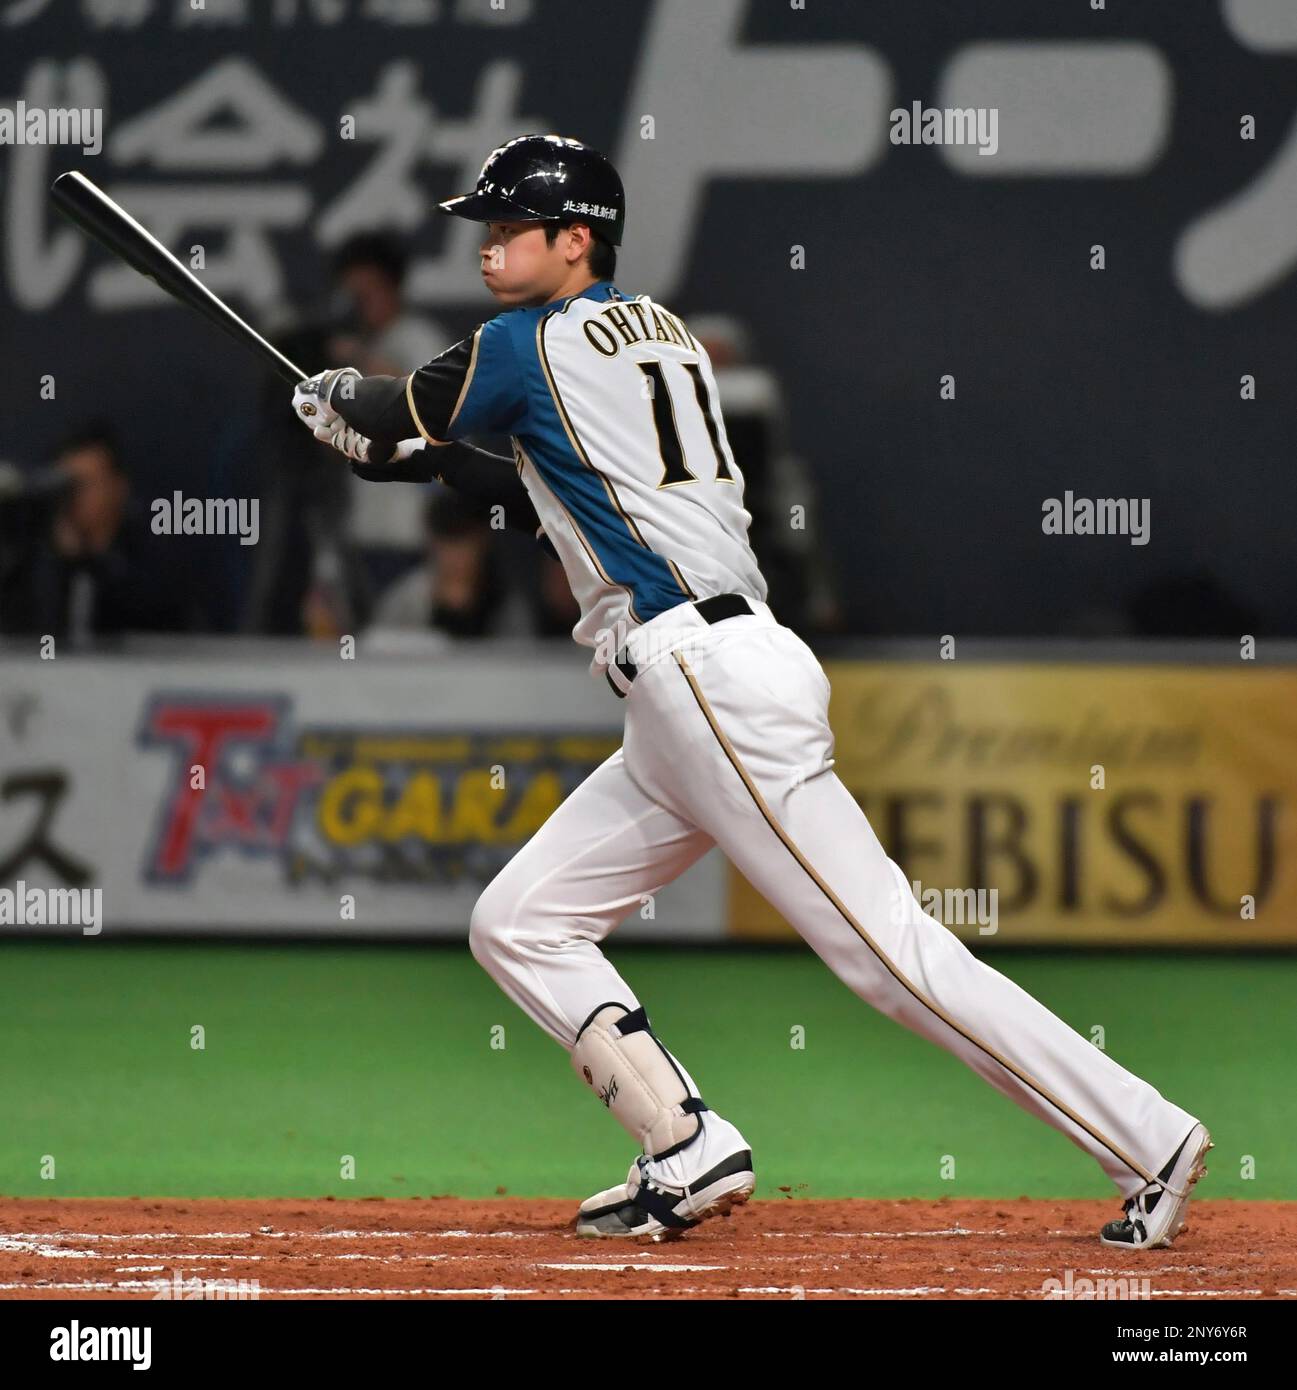 Hokkaido Nippon-Ham Fighters starter Syohei Otani makes a hit in the 4th inning during a Nippon Professional Baseballs Pacific League match against Orix Buffaloes at Sapporo Dome in Sapporo, Hokkaido on Oct.